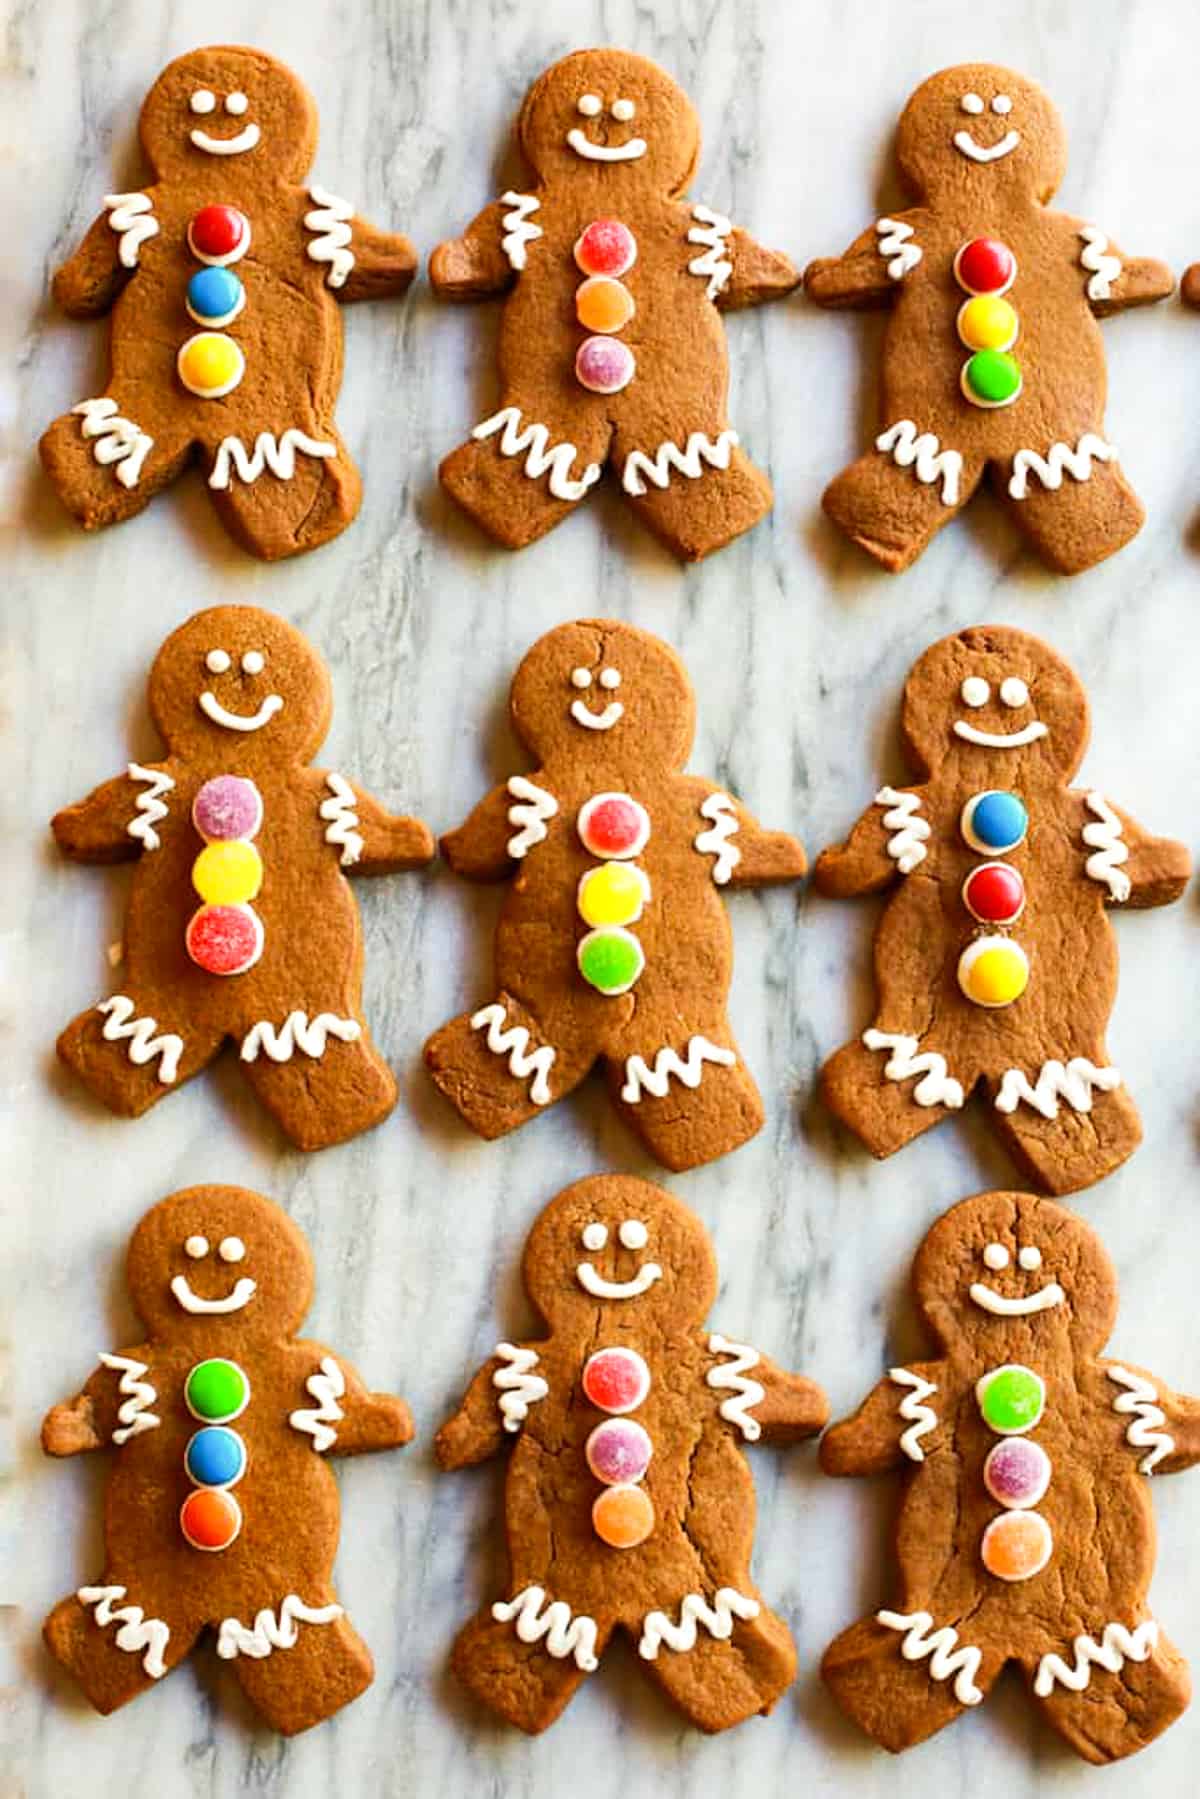 Nine gingerbread cookies decorated with faces and gumdrops, lined up in three rows.